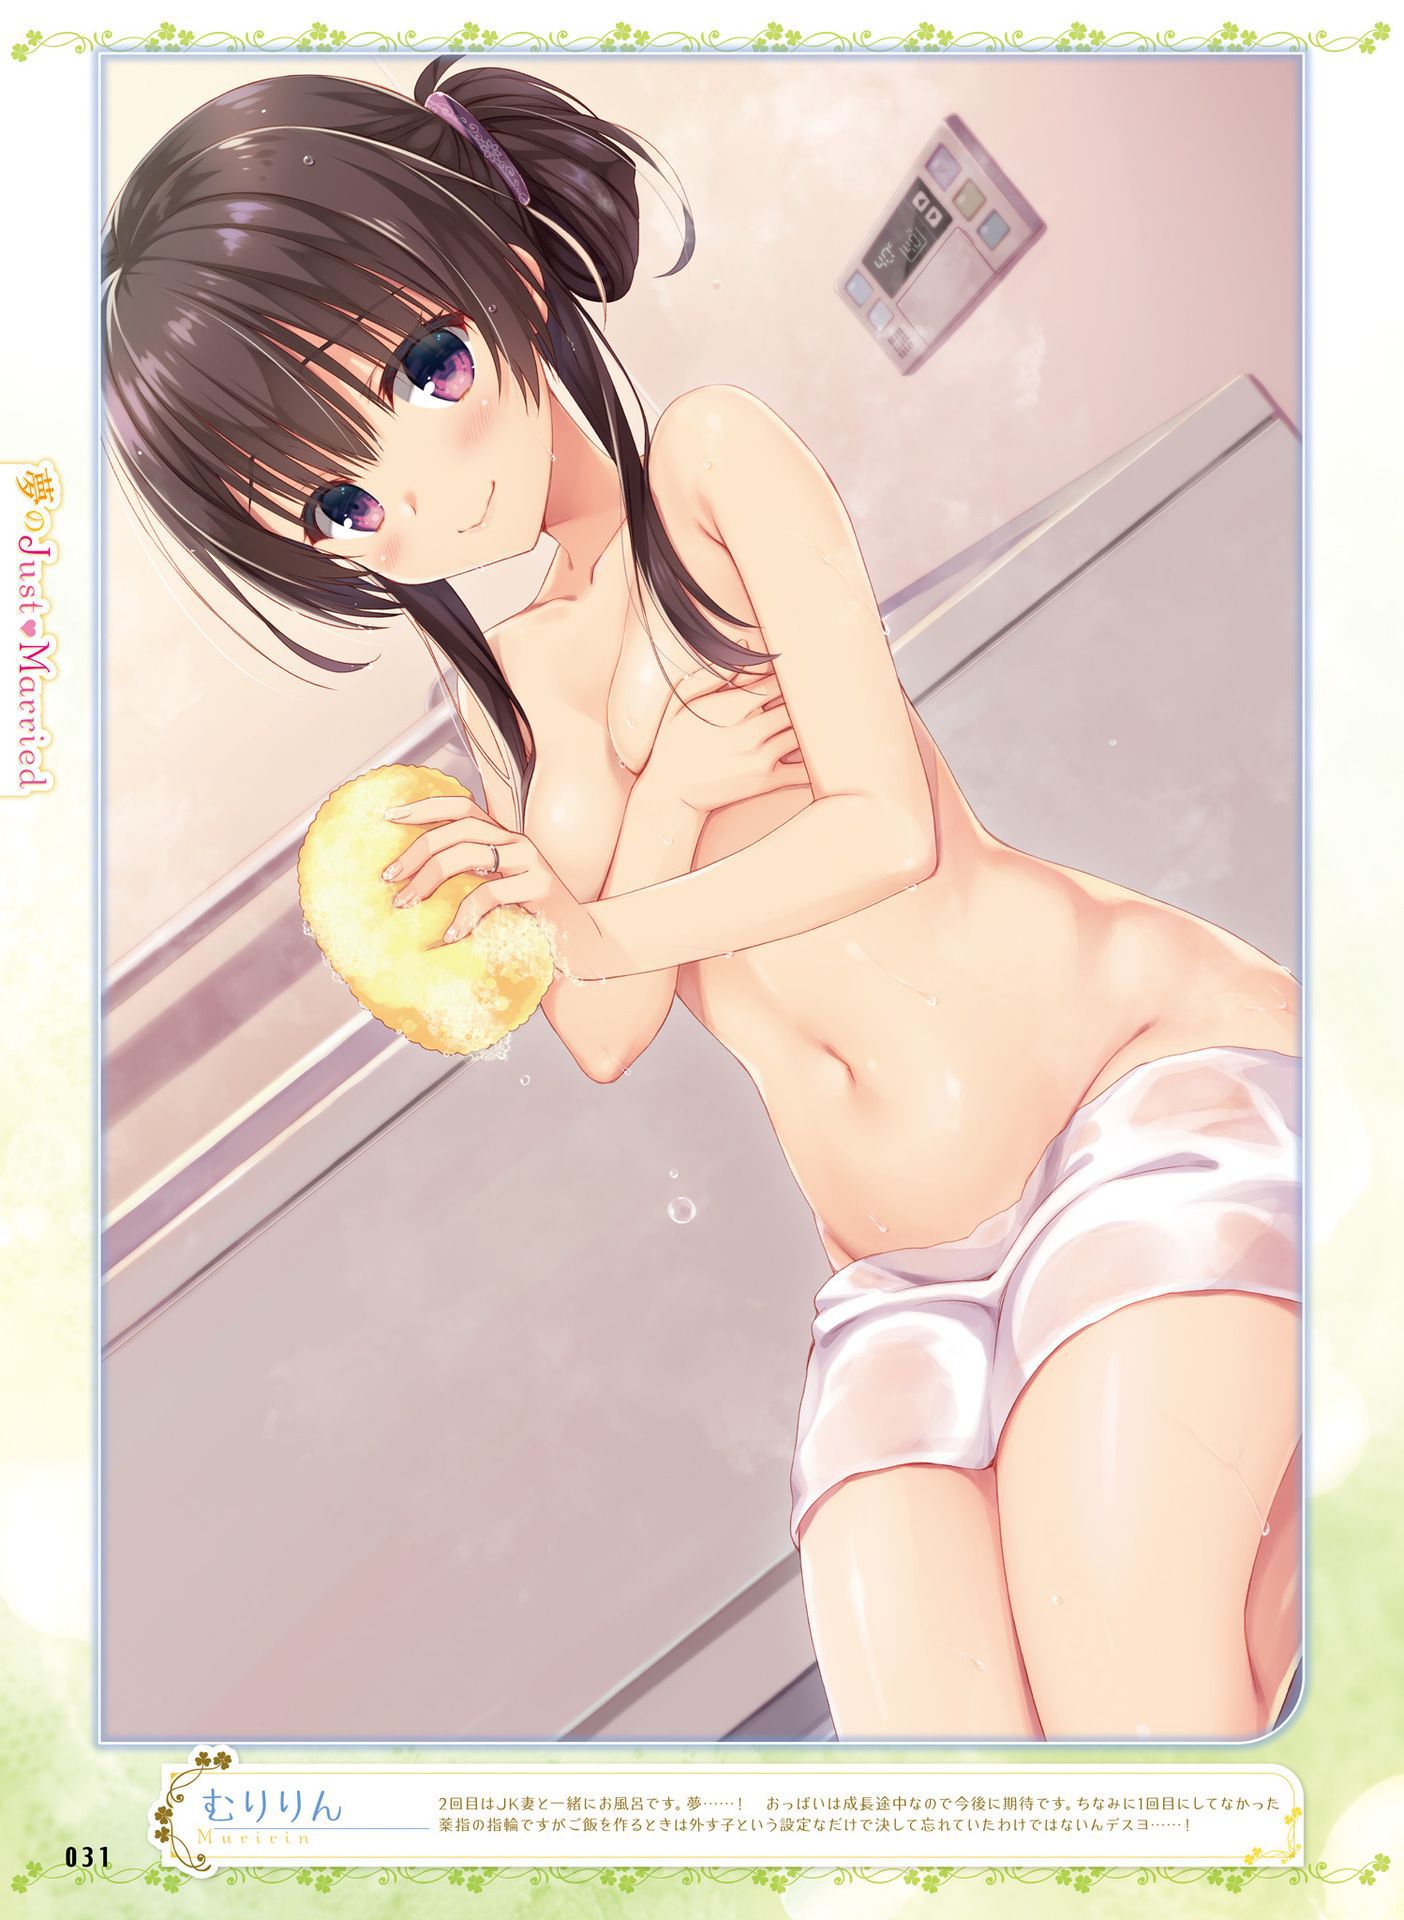 Two-dimensional erotic image of a girl in a bath who wants to peek secretly 1